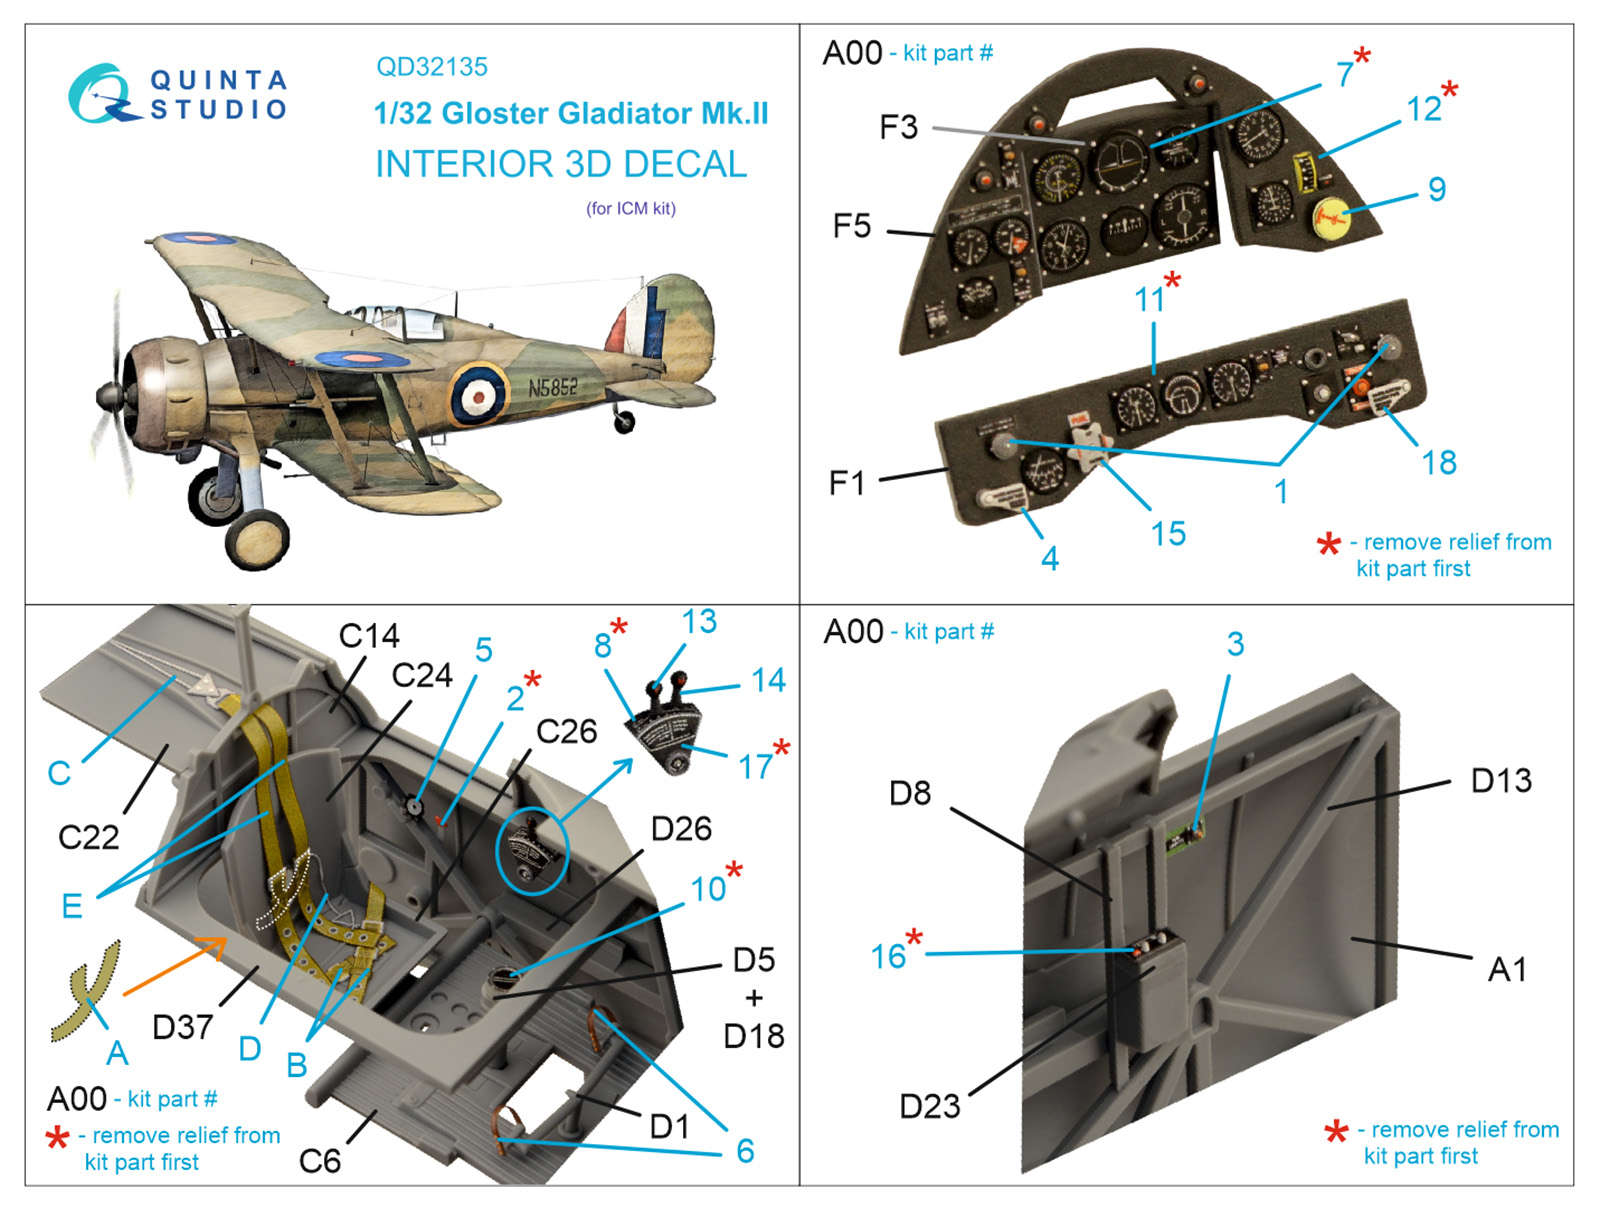 Gloster Gladiator Mk II 3D-Printed & coloured Interior on decal paper (ICM)